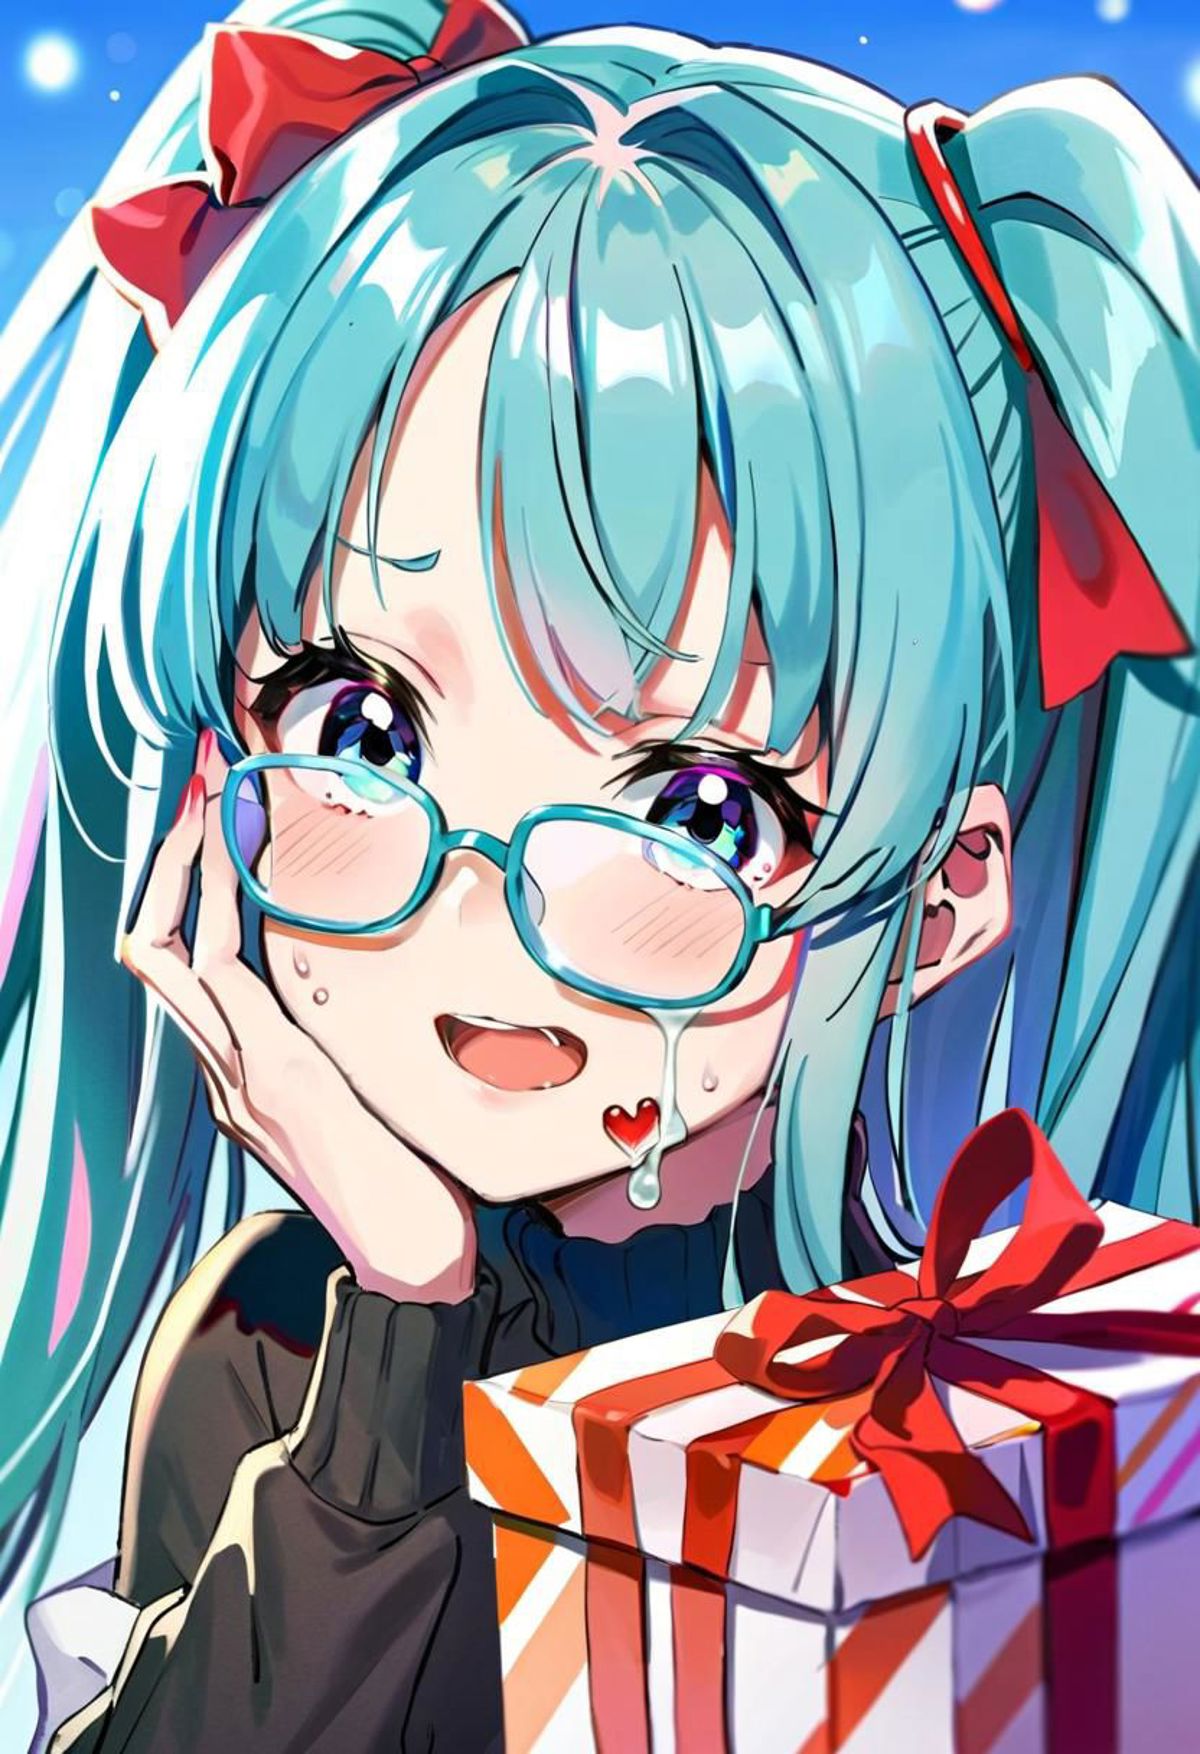 Anime girl with glasses crying over a gift box.